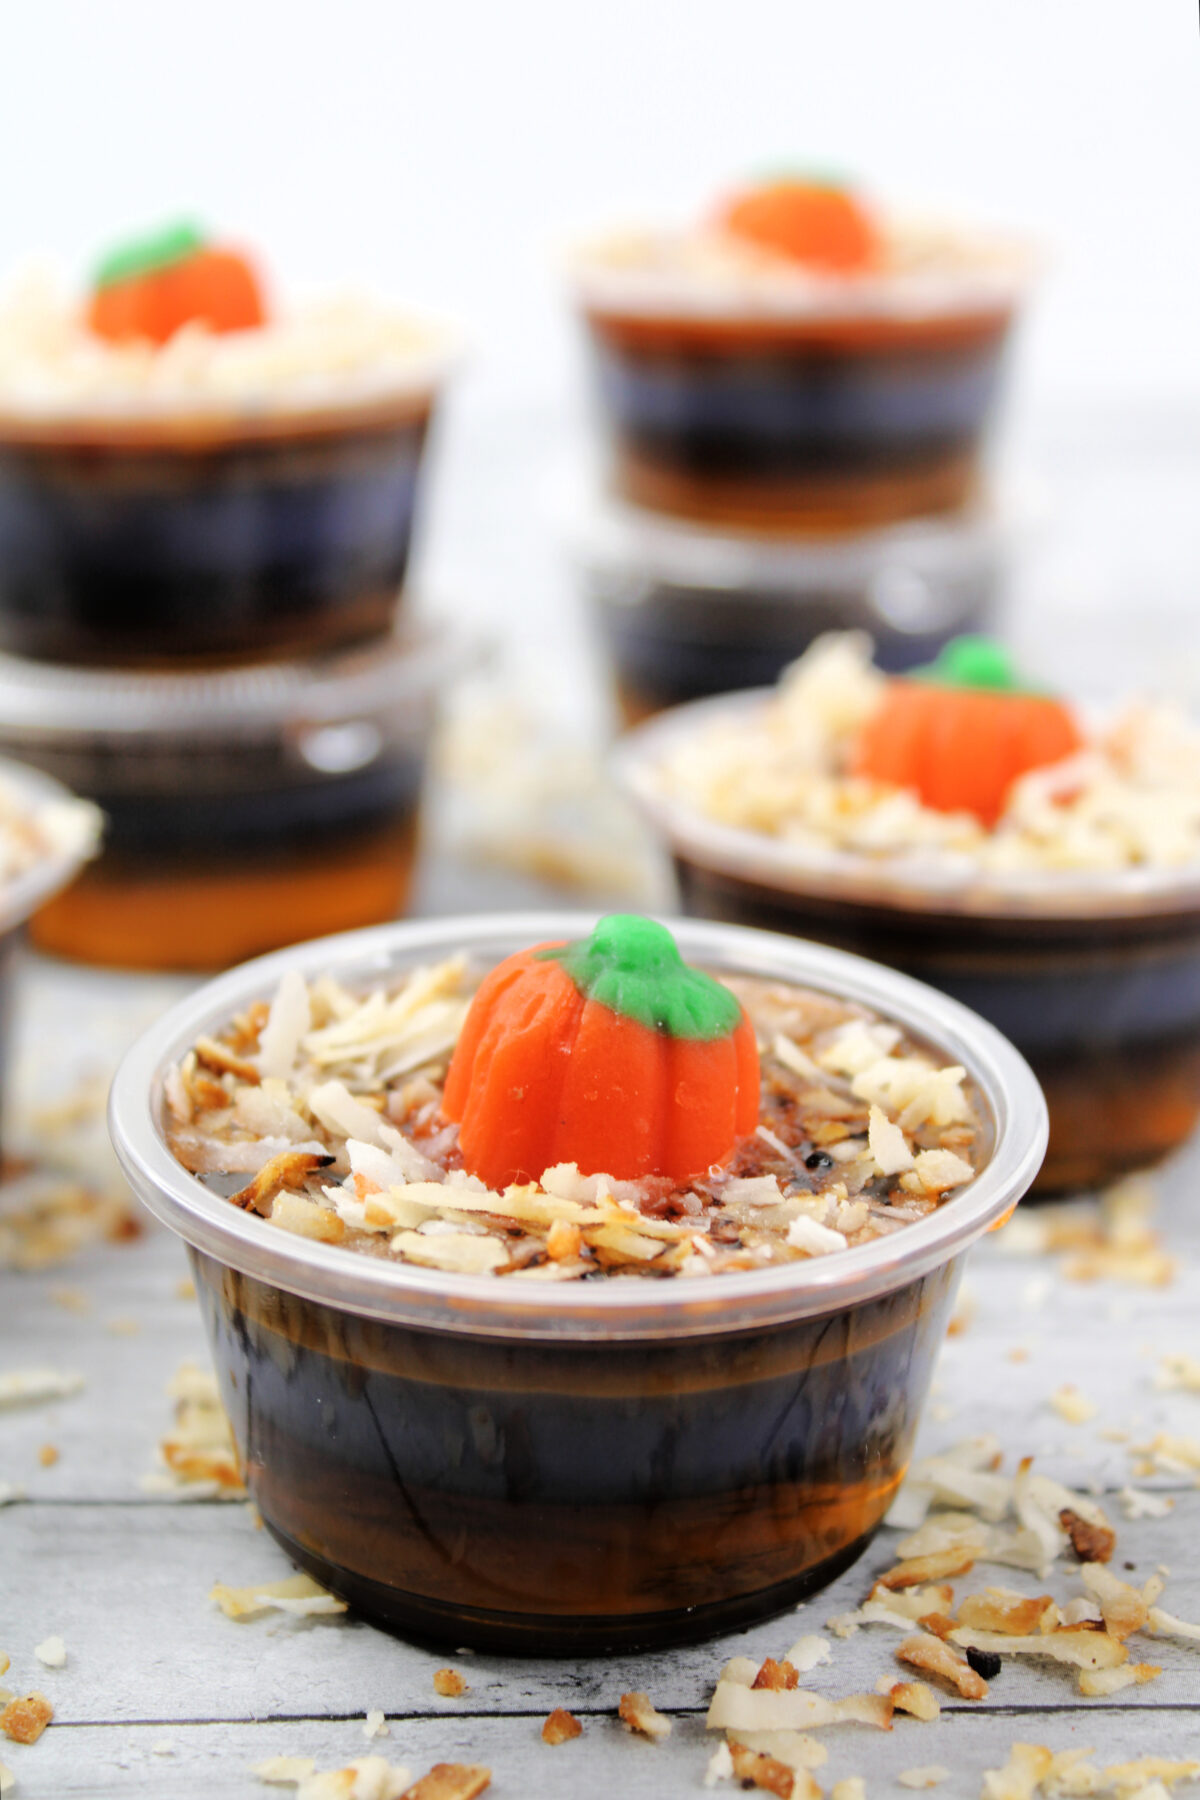 Looking for a fun way to celebrate the fall season? Check out this delicious pumpkin patch jello shots recipe for your next fall party!